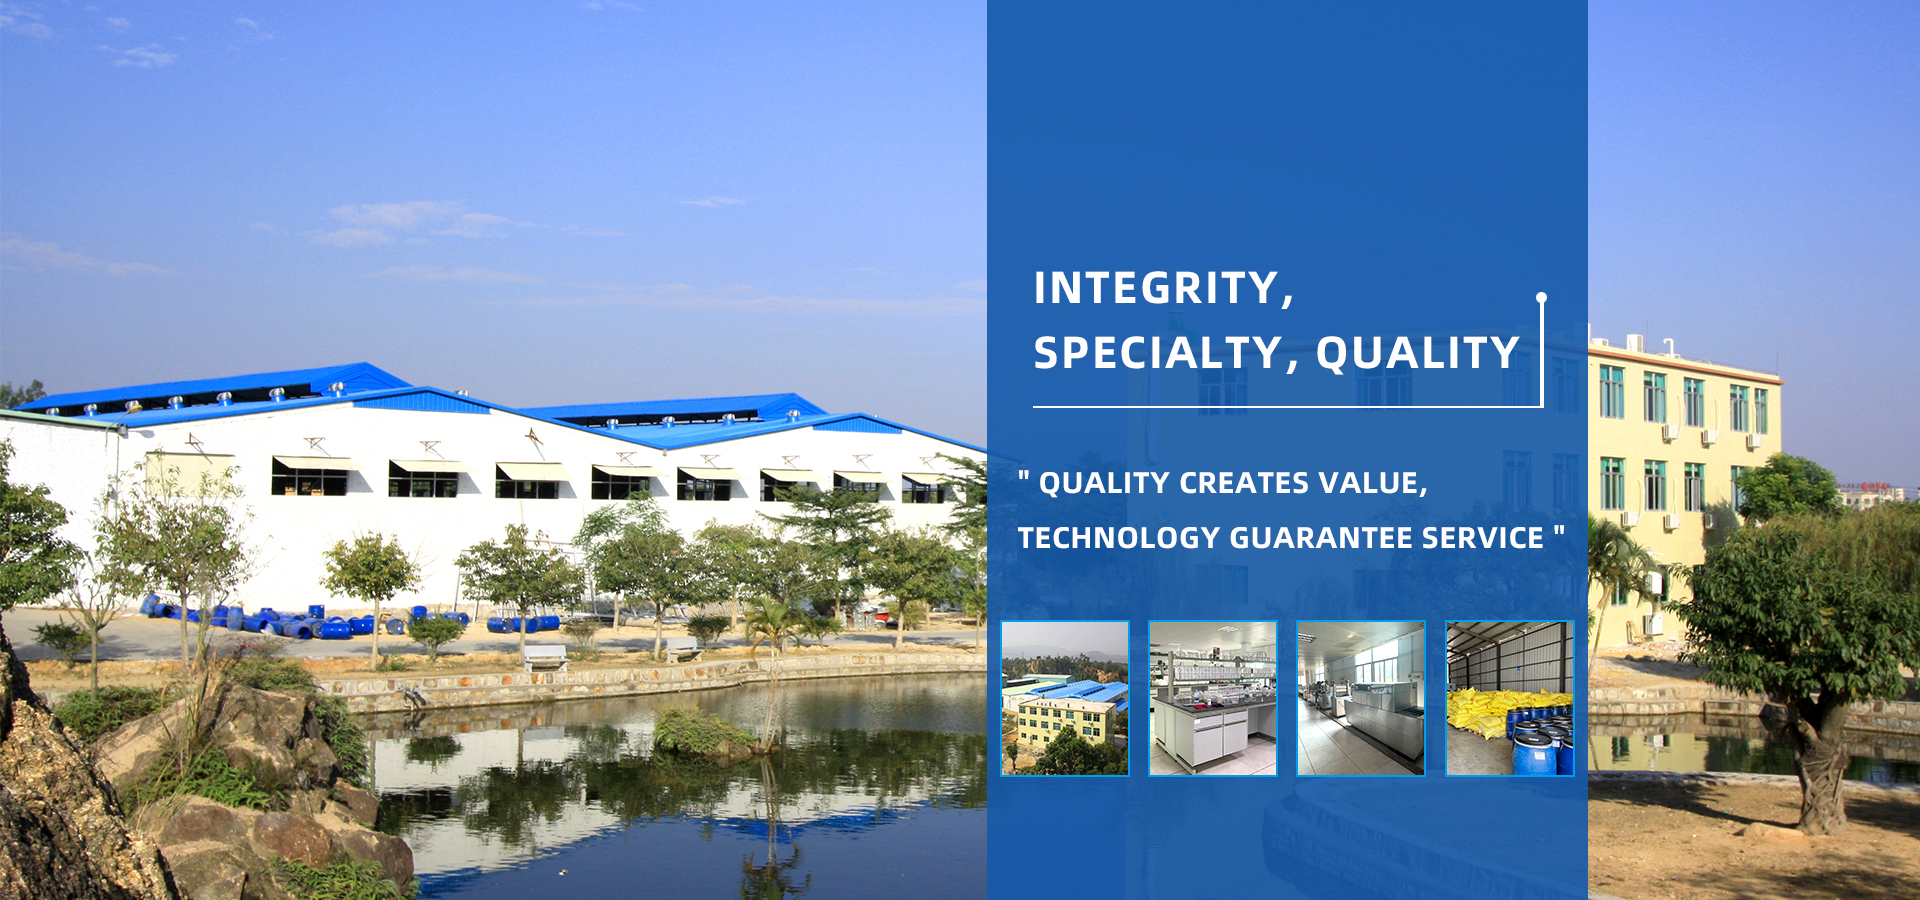 Integrity, Specialty, Quality